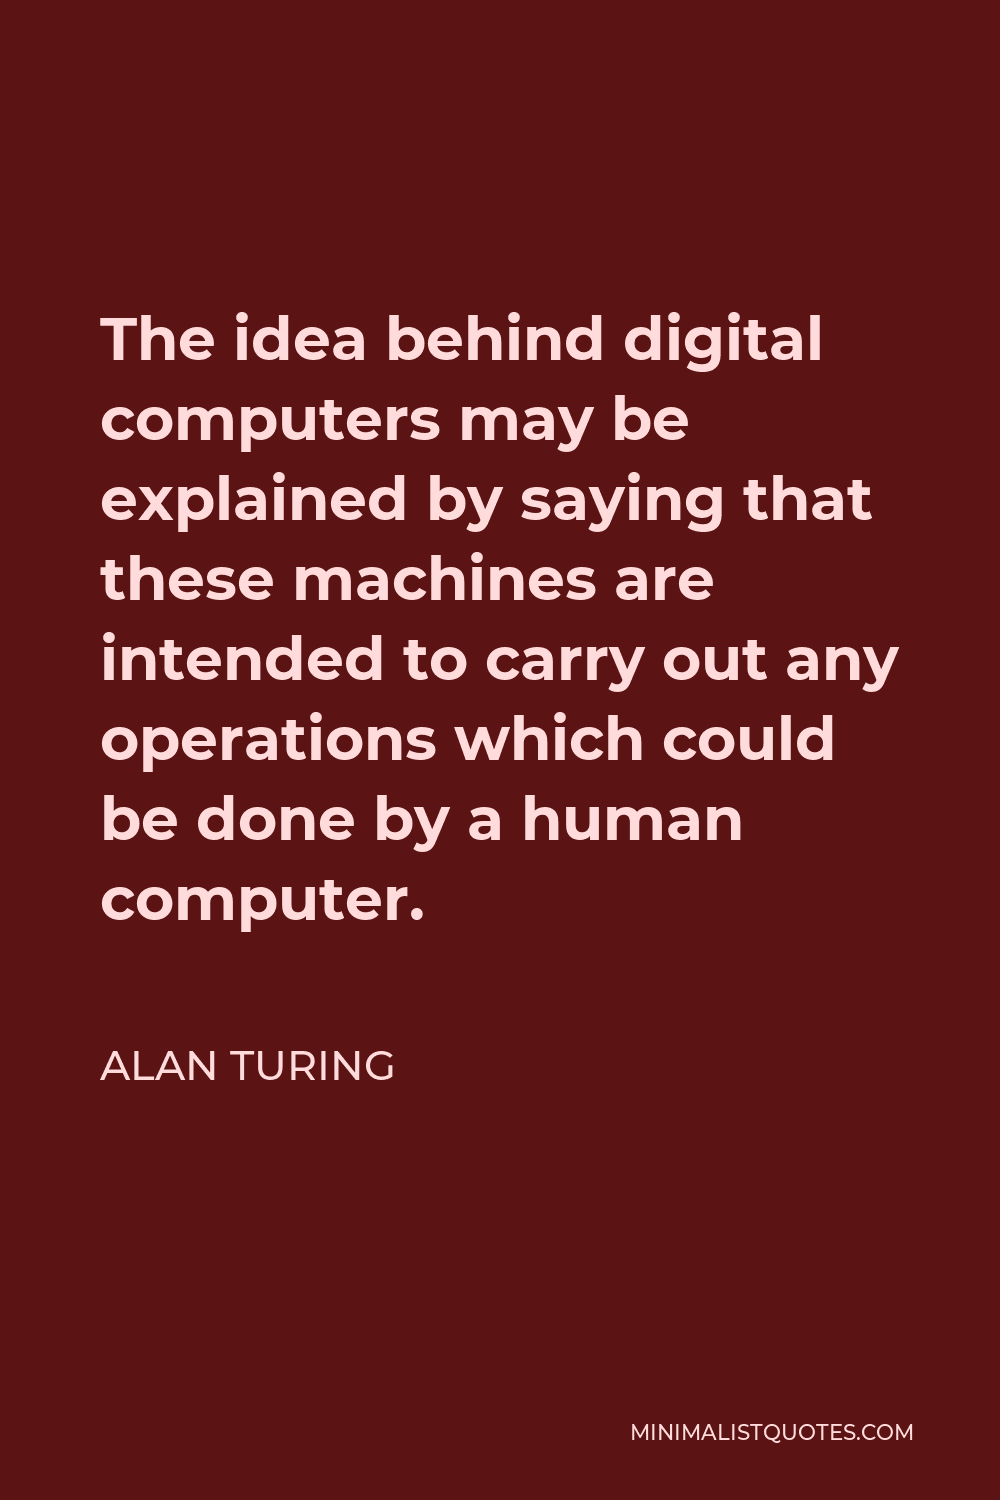 Alan Turing Quote - The idea behind digital computers may be explained by saying that these machines are intended to carry out any operations which could be done by a human computer.